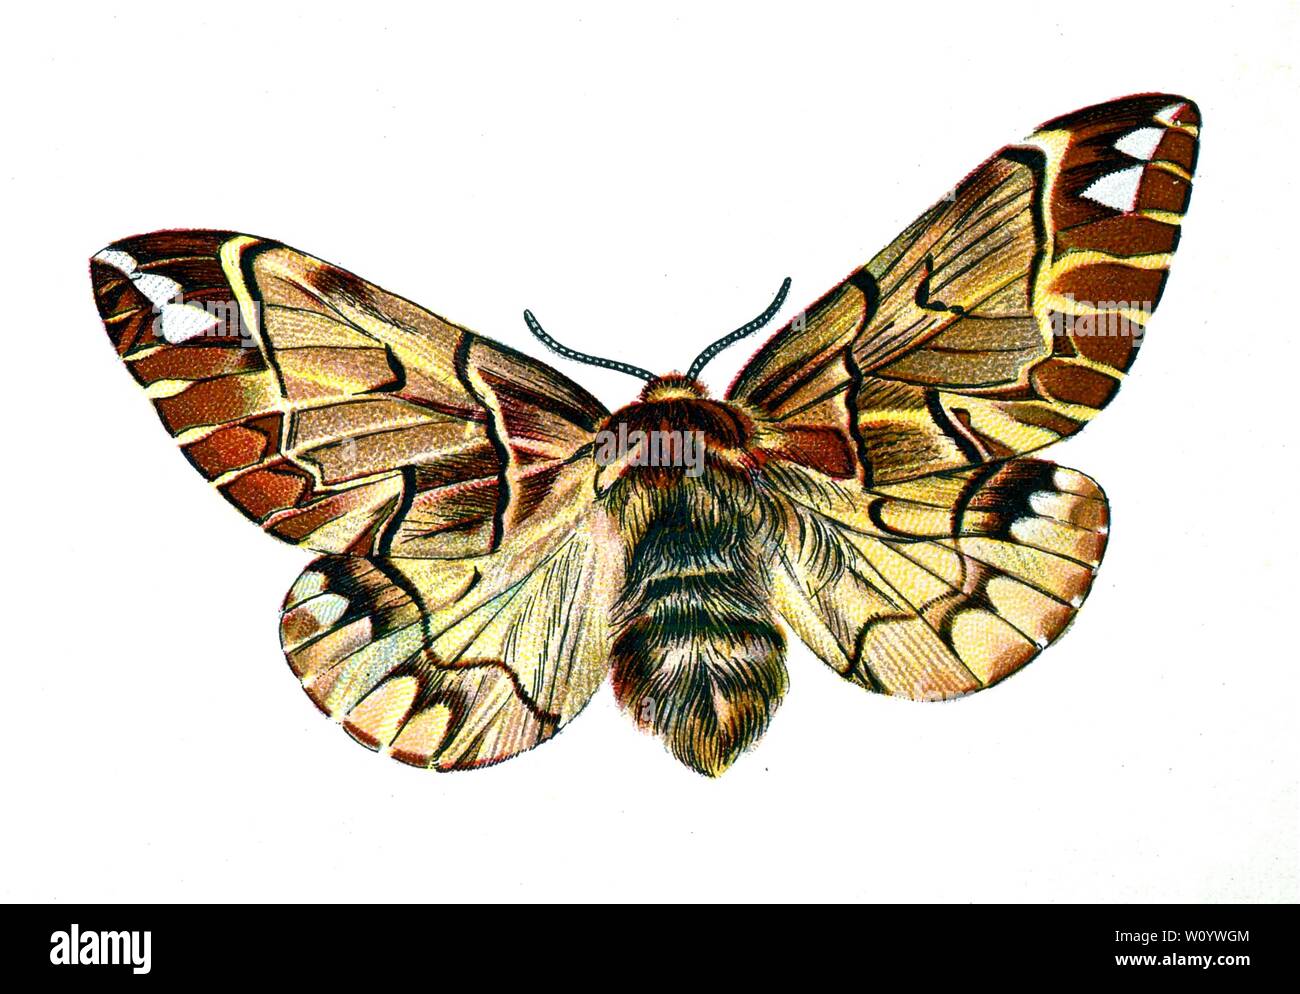 Endromis versicolora, The Kentish Glory Moth - Color Butterfly / Moth Lithograph from 1895 book, 'Europe’s Best-Known Butterflies' by F. Nemos Stock Photo